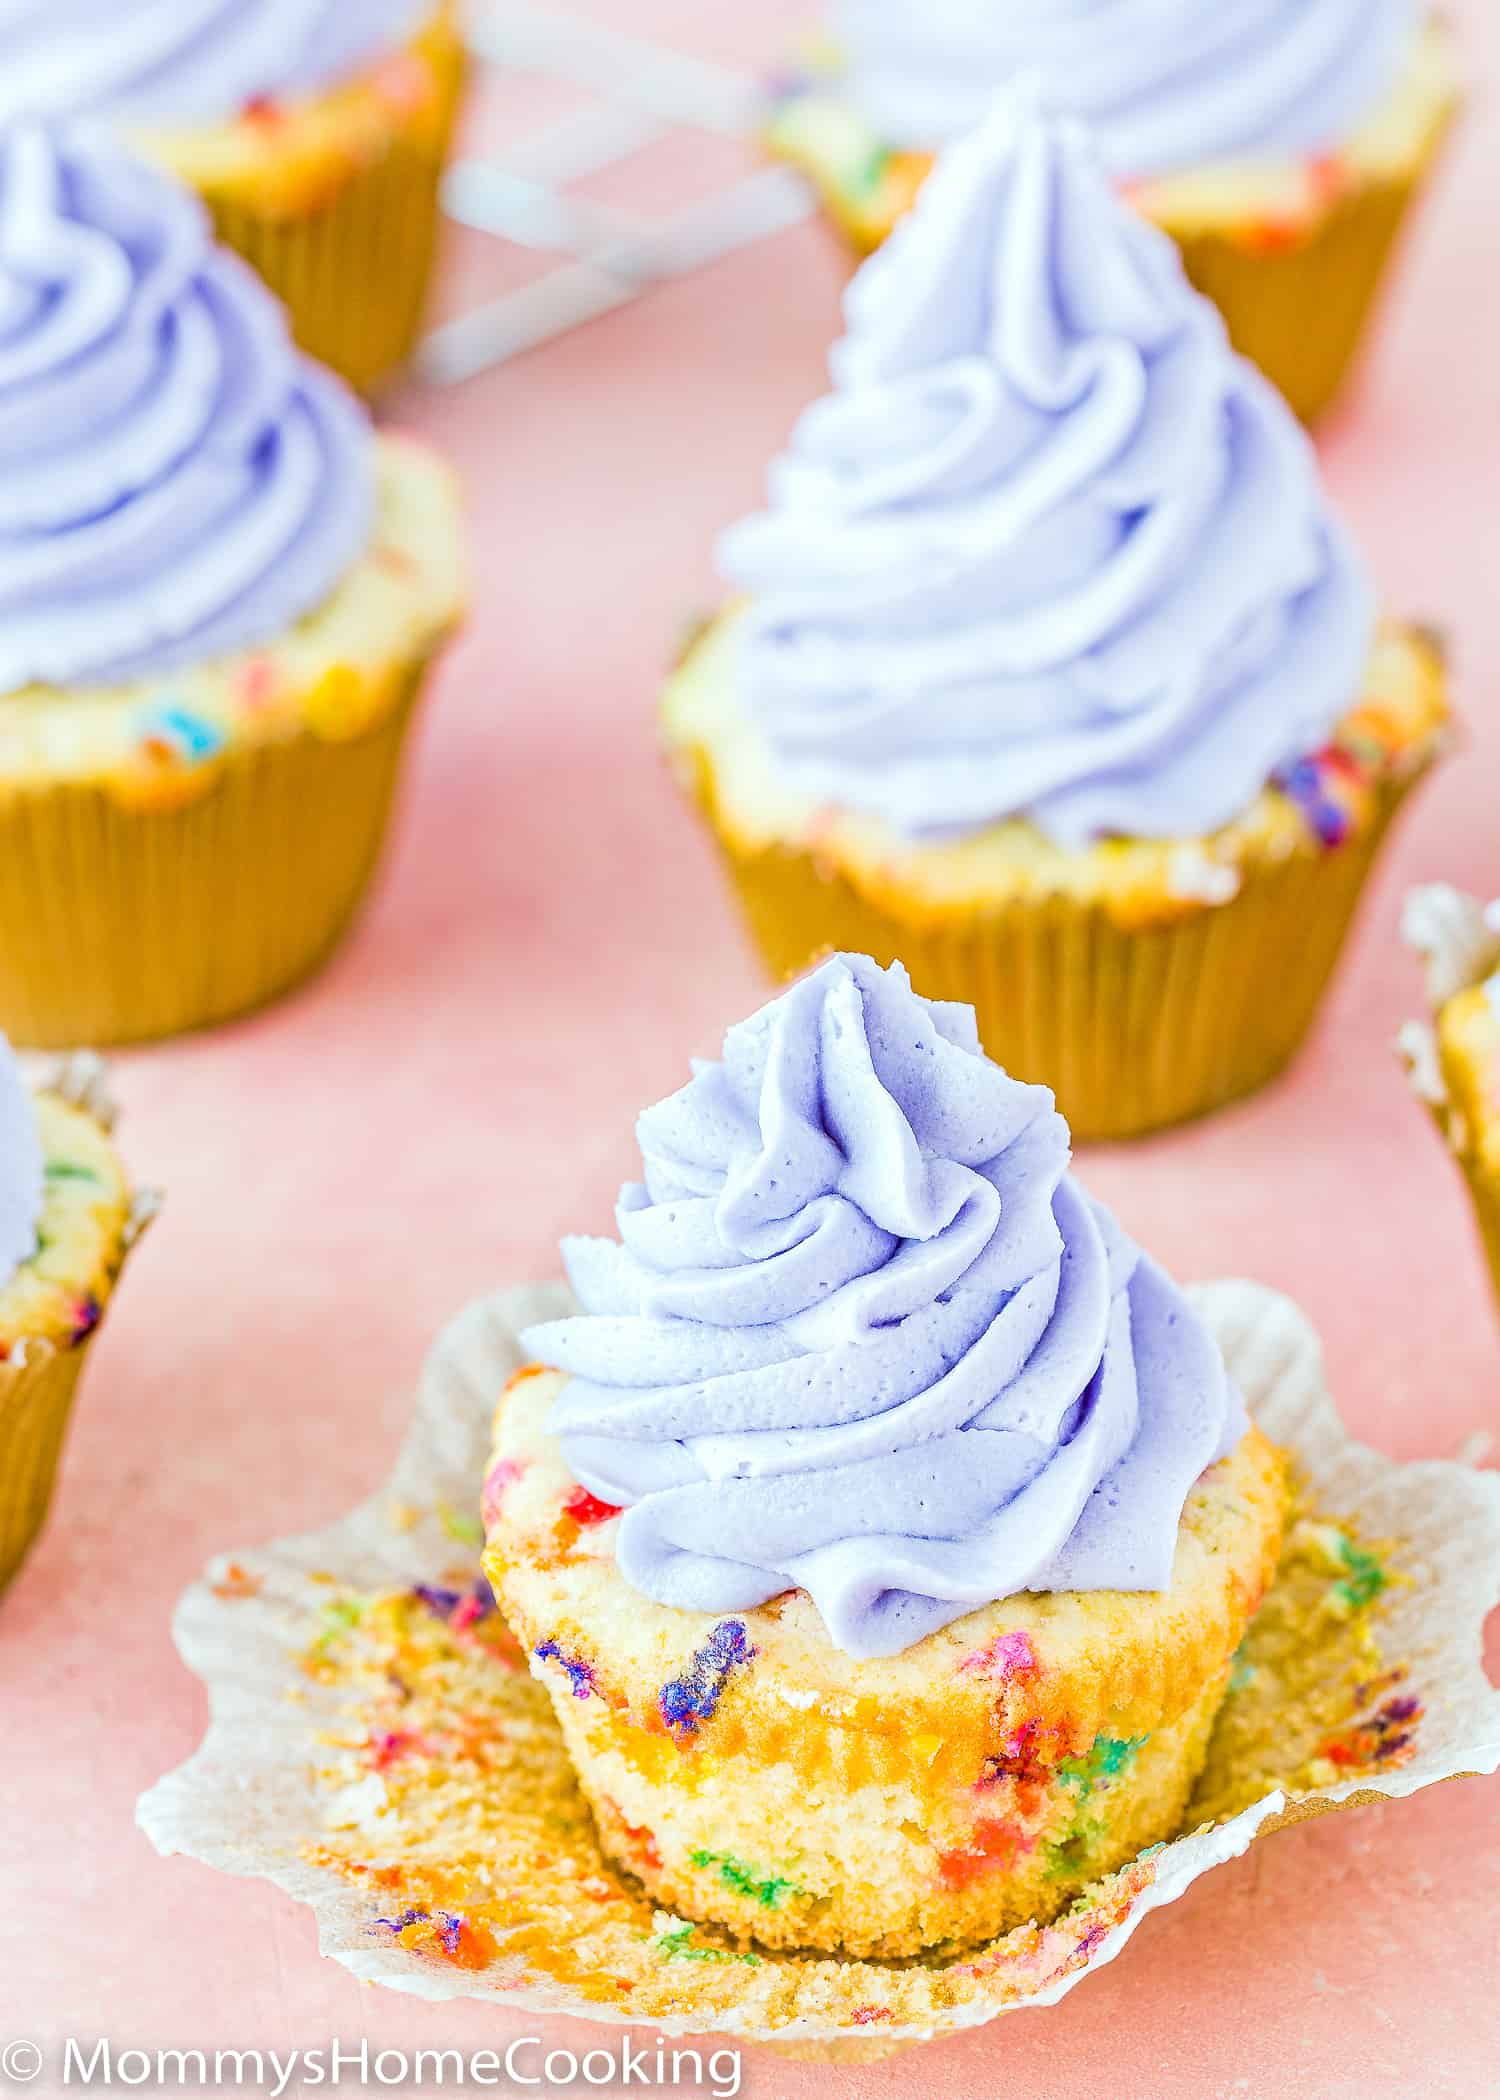 Eggless Funfetti Cupcakes with purple buttercream over a pink surface.